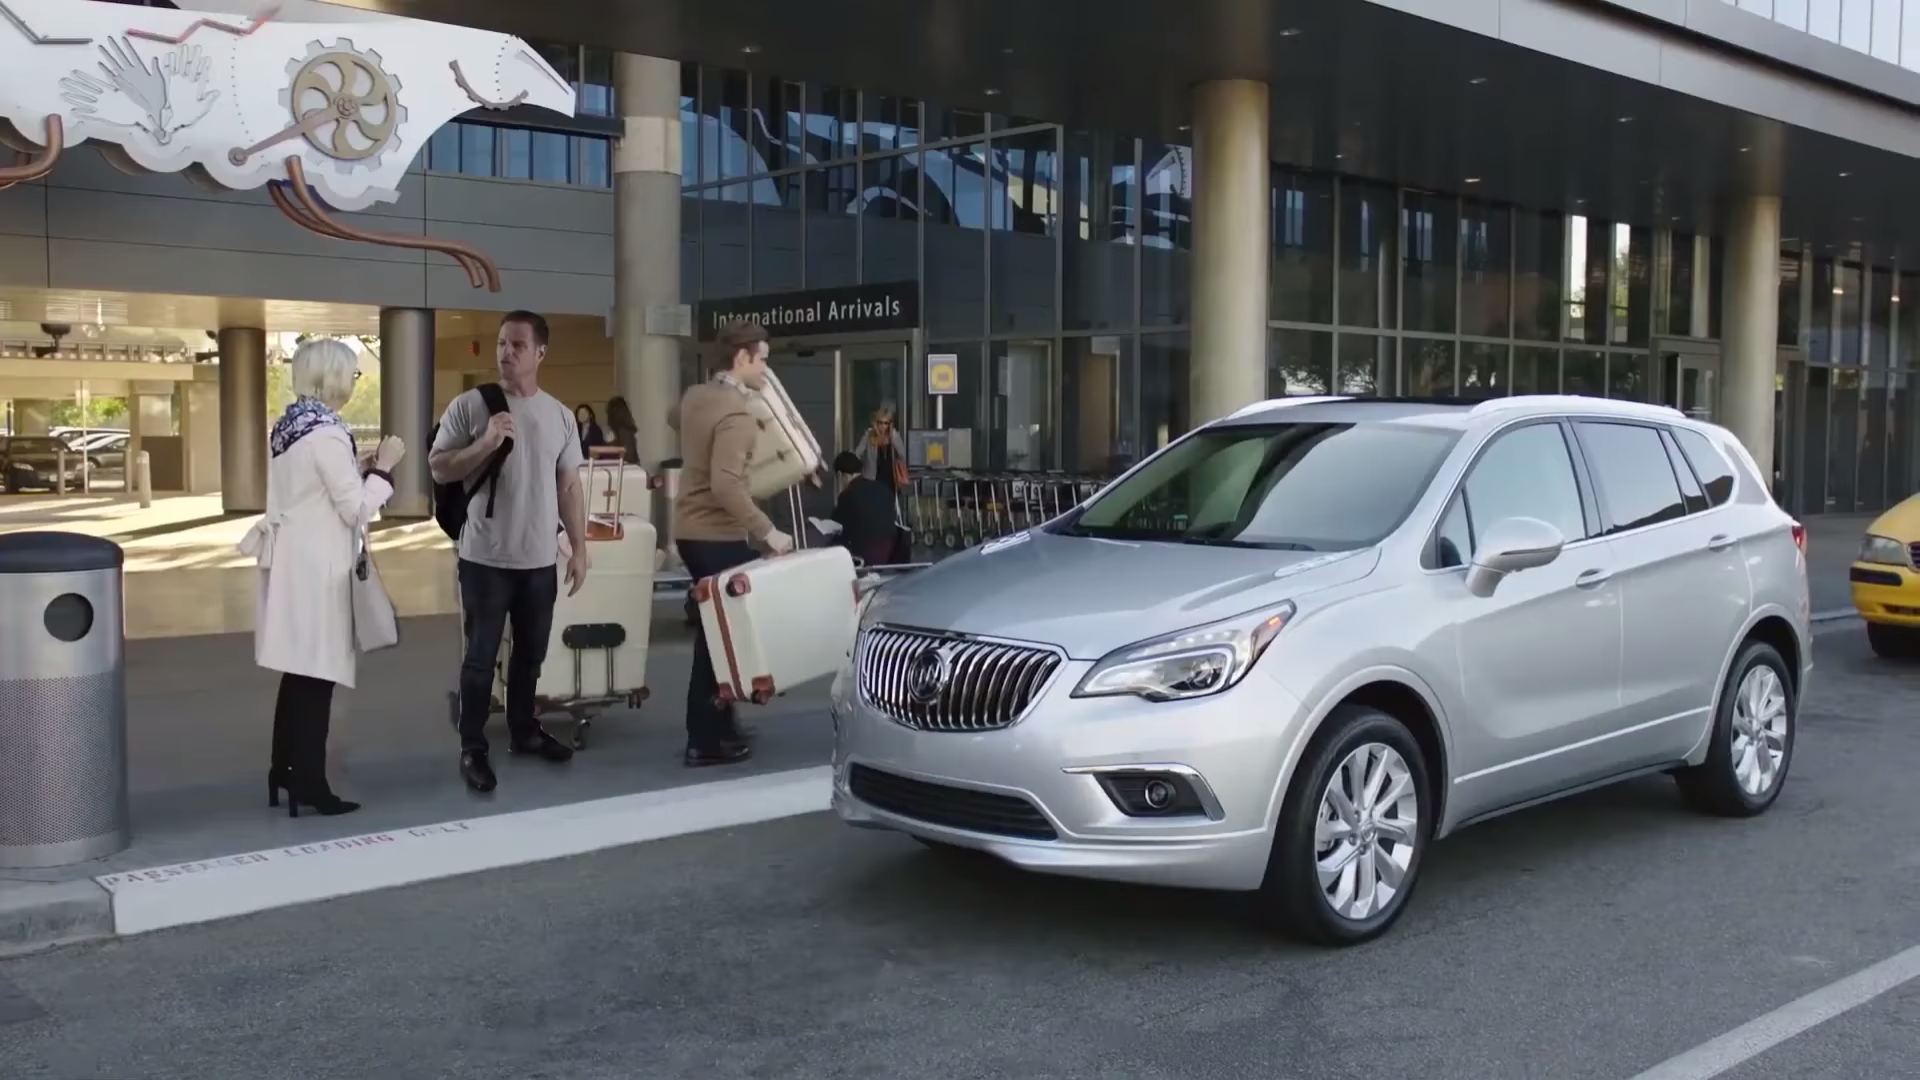 Watch Mahk’s Take on the Buick Envision in the Latest Zebra Corner Spoof